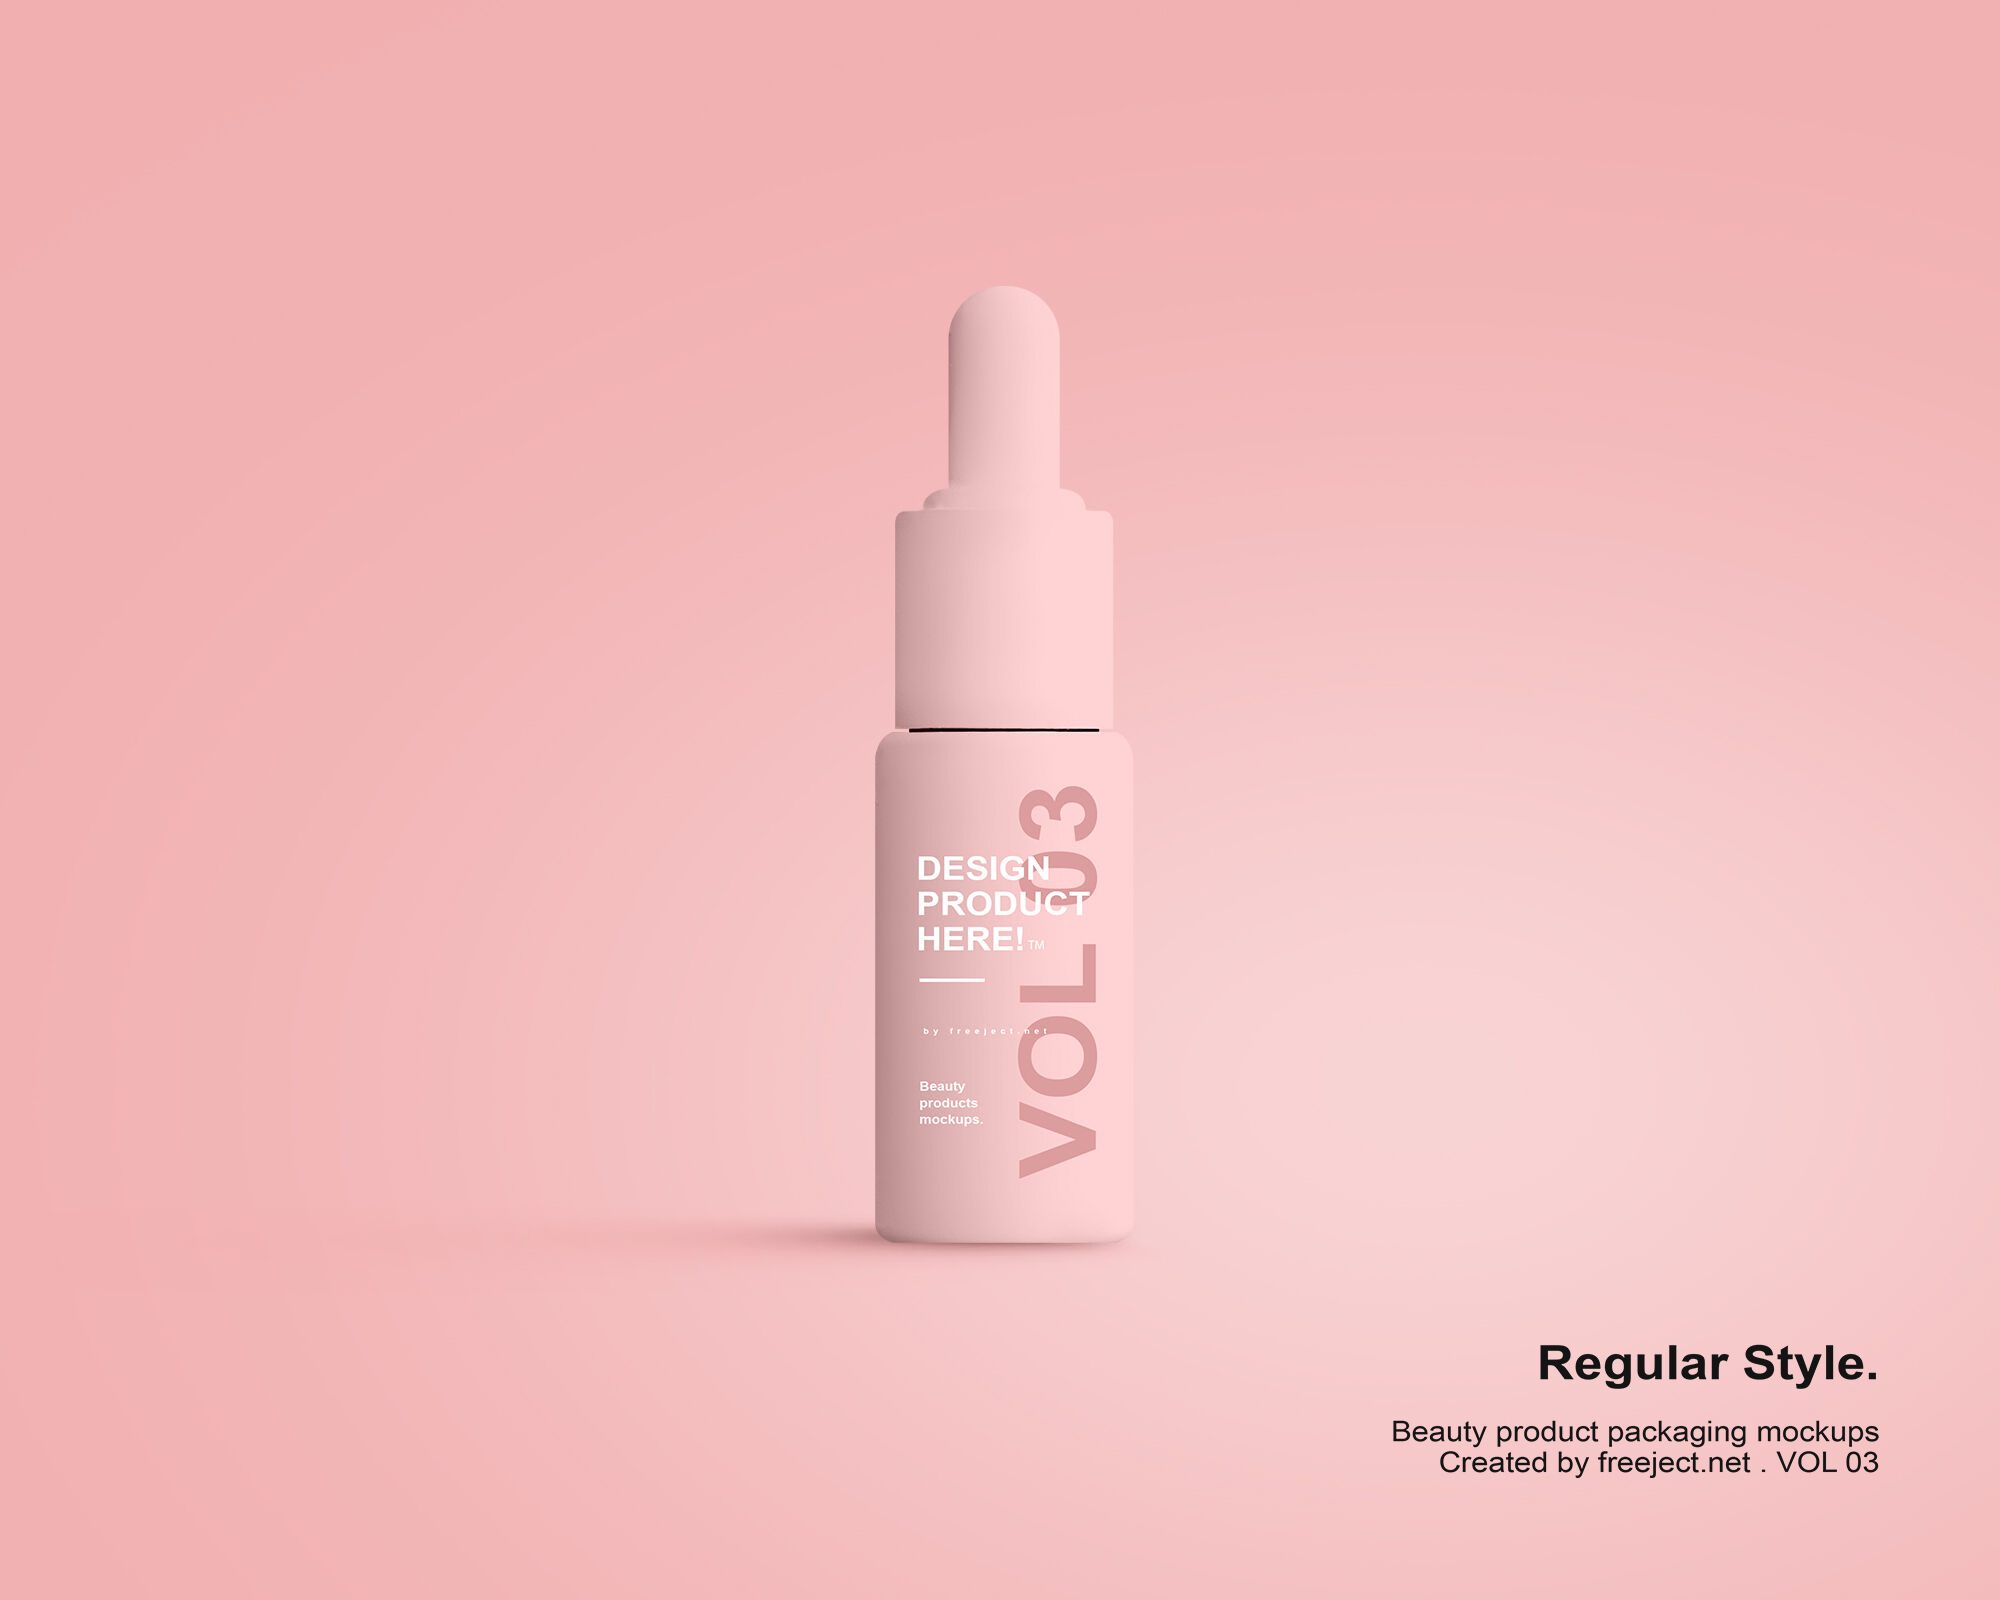 Front View of Two Cosmetic Serum Bottle Mockups FREE PSD